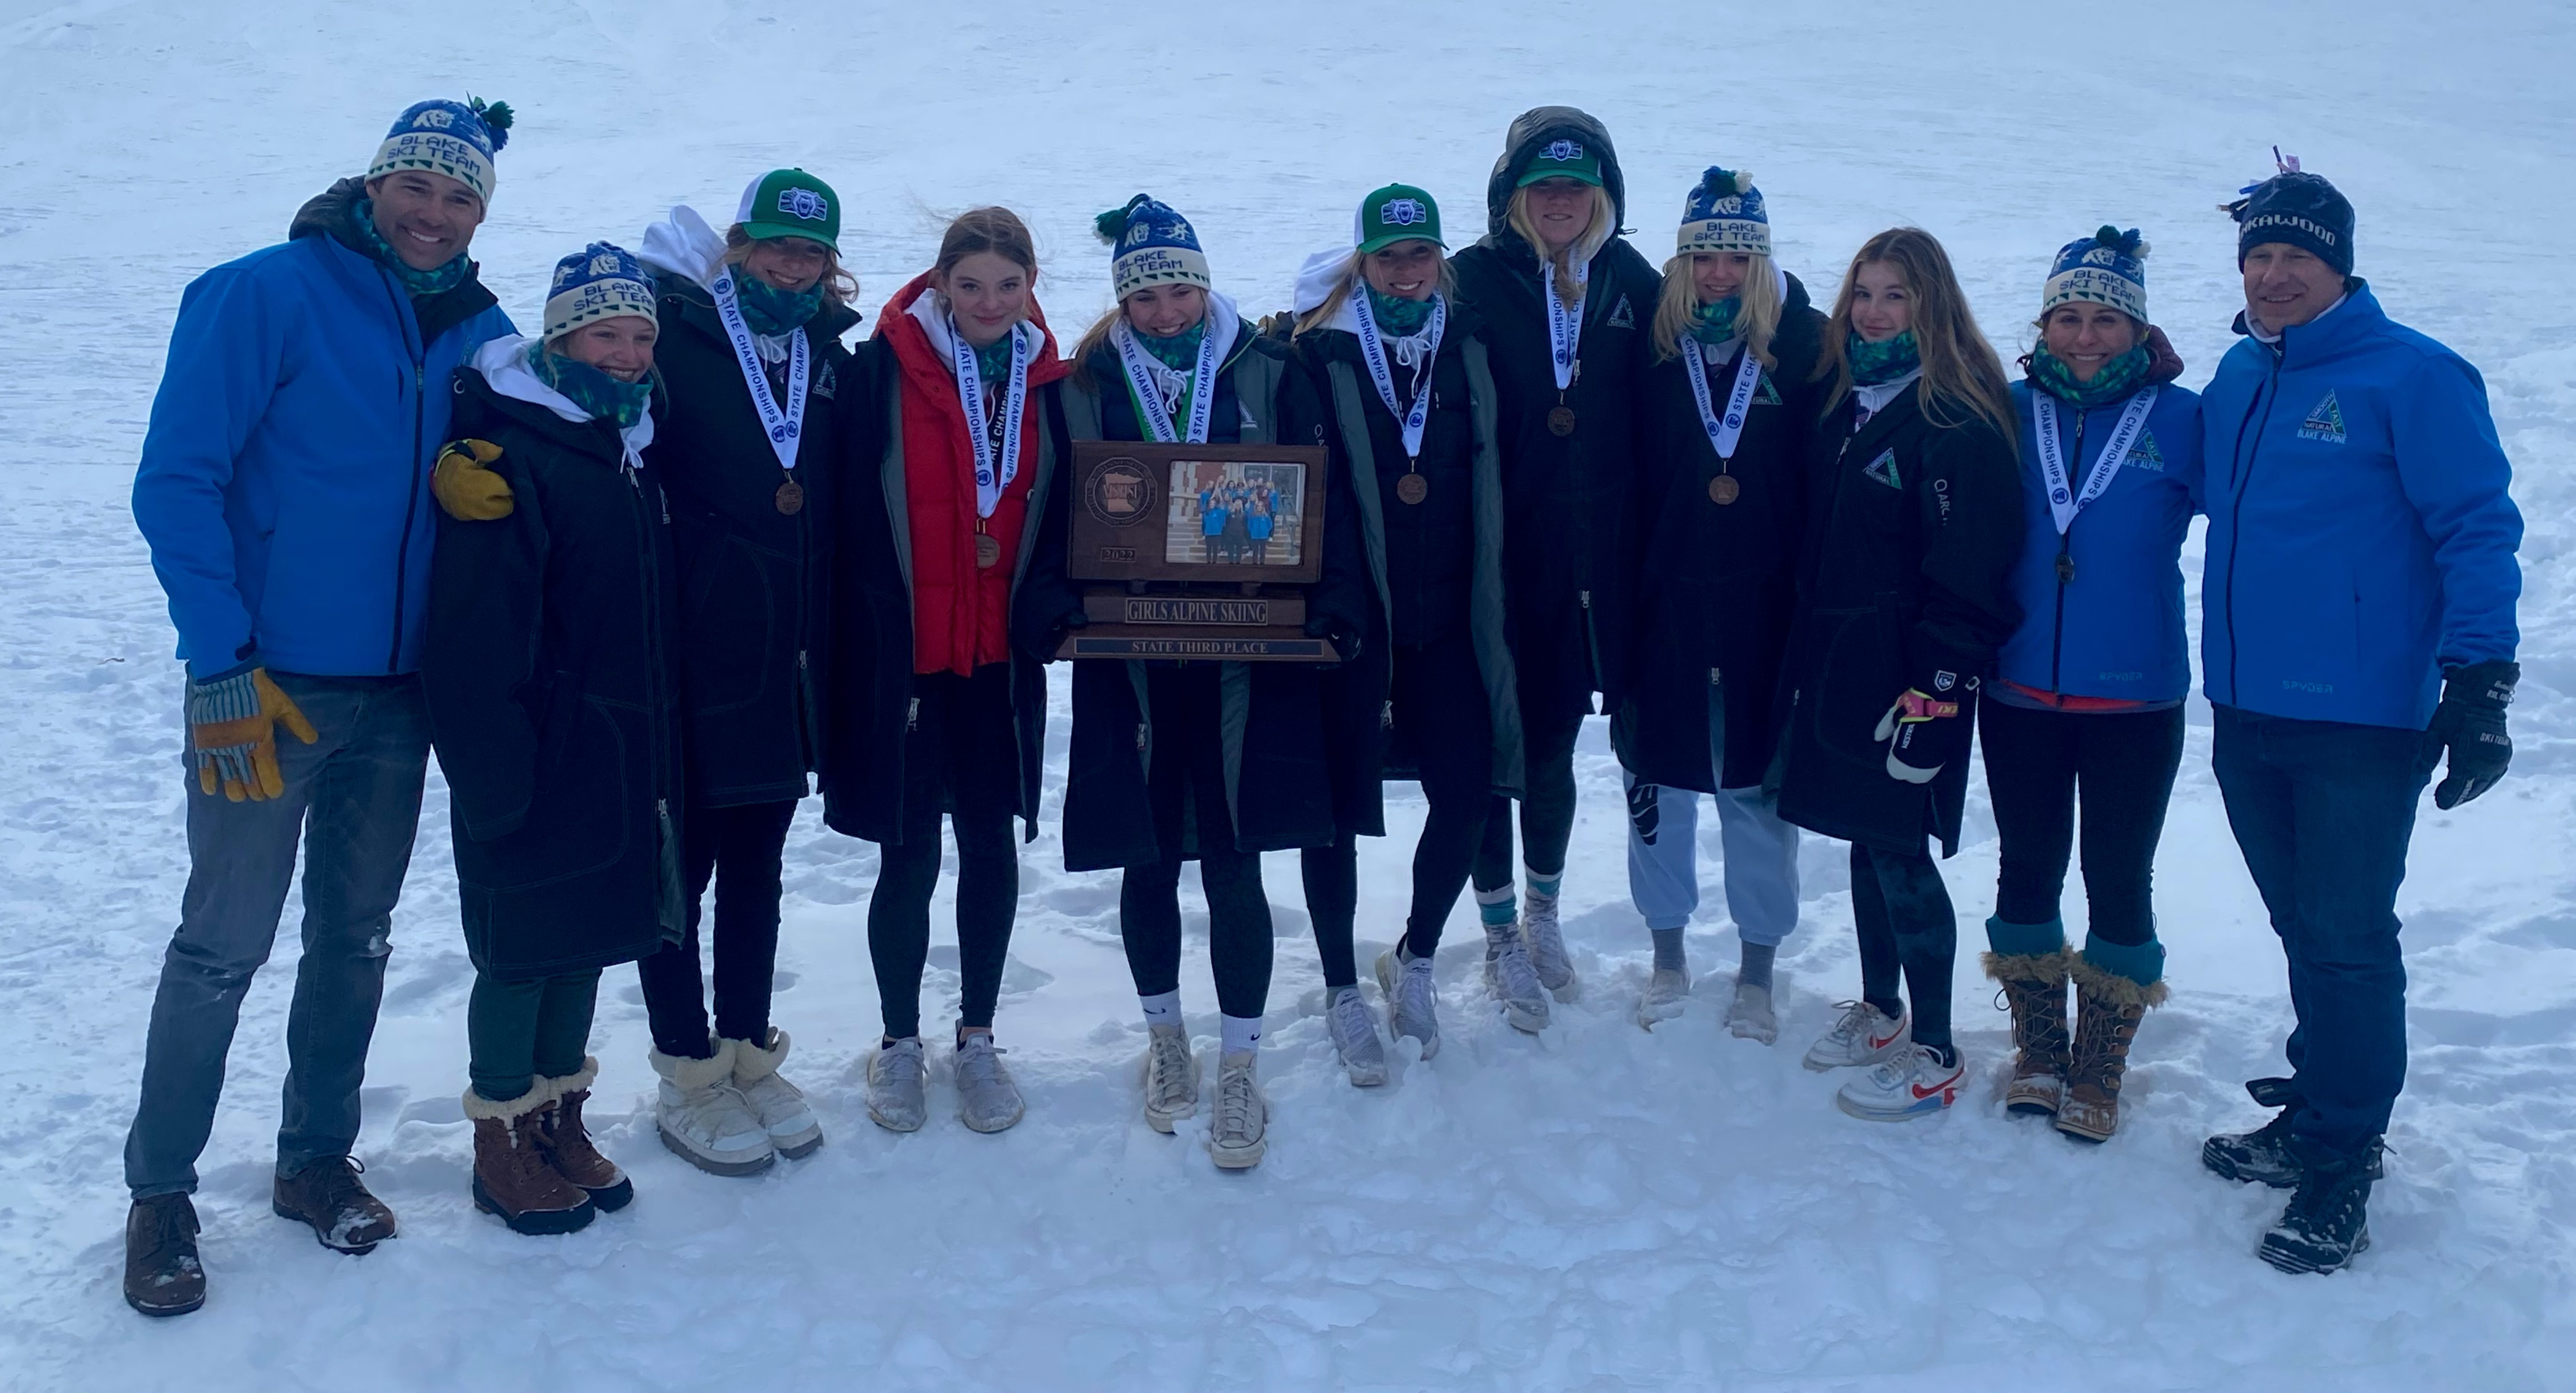 Pictured: Girls Alpine state team and coaches: Robbie Massie ‘03, Betsy Strachota and Chris Girk. 
Girls placed 3rd as a team and individually, Ava Pihlstrom ‘22 was fifth, Vivien Pihlstrom ‘25 was eighth, Mackenzie Higgins ‘24 placed 34th, Kate Rekas ‘23 was 52nd, Hughes was 66th, and Lily Erlandson ‘23 fell and wasn’t able to finish. 
